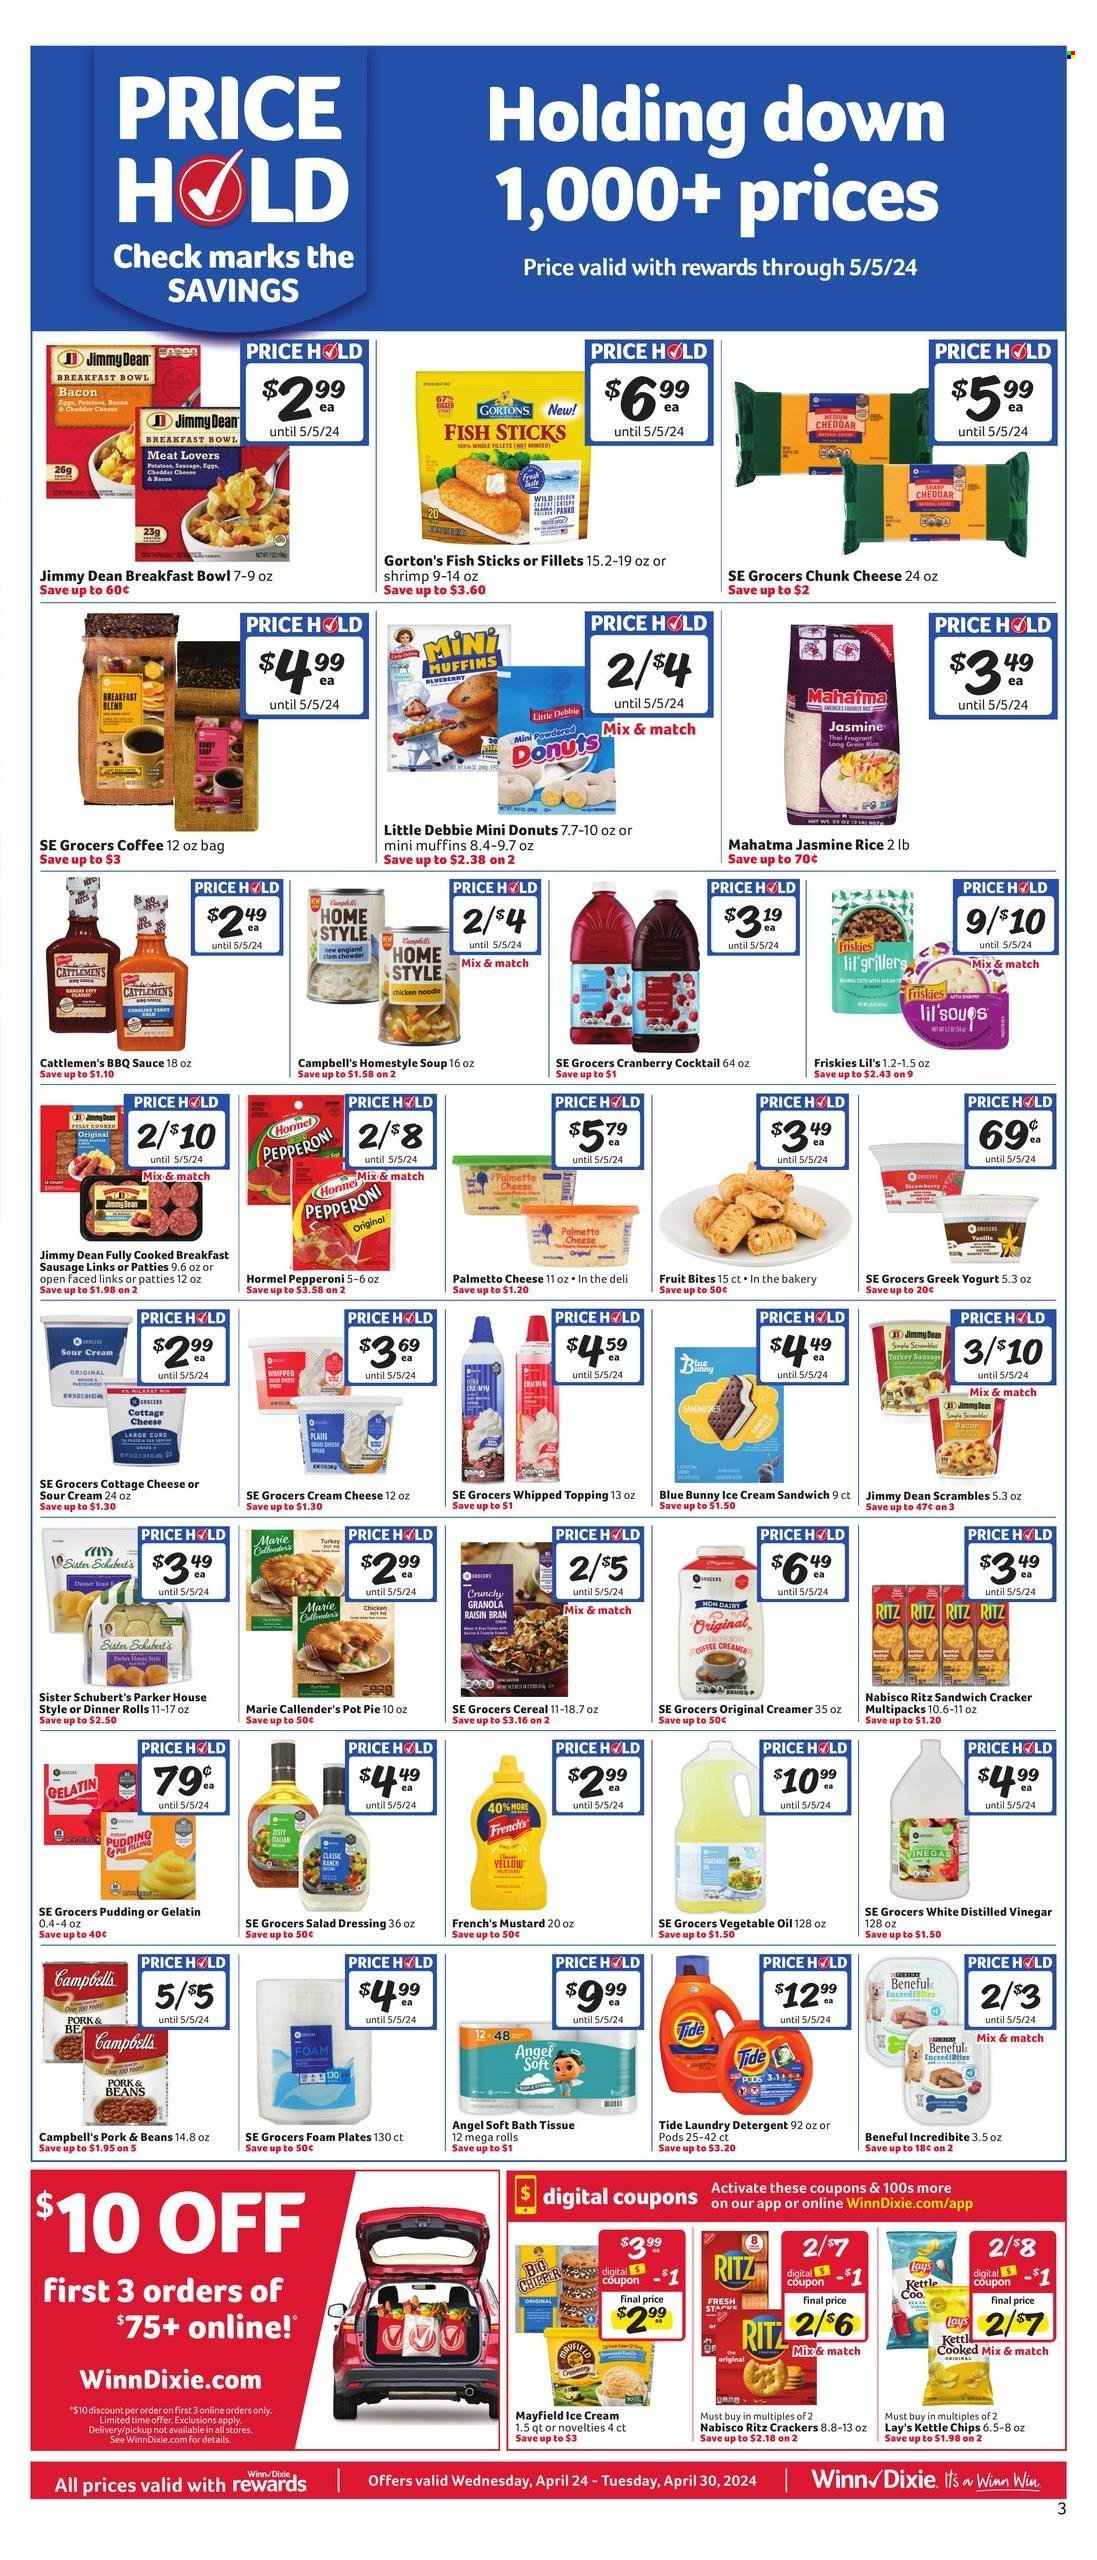 thumbnail - Winn Dixie Flyer - 04/24/2024 - 04/30/2024 - Sales products - greek yoghurt, yoghurt, Jimmy Dean, sausage, sausage patties, BBQ sauce, sauce, cheese, Hormel, pepperoni, fruit drink, Friskies, chunk cheese, breakfast bowl, Campbell's, soup, coffee, donut, rice, jasmine rice, Gorton's, fish sticks, ready meal, topping, ice cream, cereals, creamer, cottage cheese, sour cream, ice cream sandwich, Blue Bunny, cream cheese, dinner rolls, pie, pot pie, Marie Callender's, pudding, gelatin, sandwich, crackers, RITZ, Nabisco, salad dressing, dressing, mustard, vegetable oil, oil, chips, Lay’s, Kettle chips, bath tissue, vinegar, plate, foam plates, detergent, Tide, laundry detergent, Purina. Page 6.